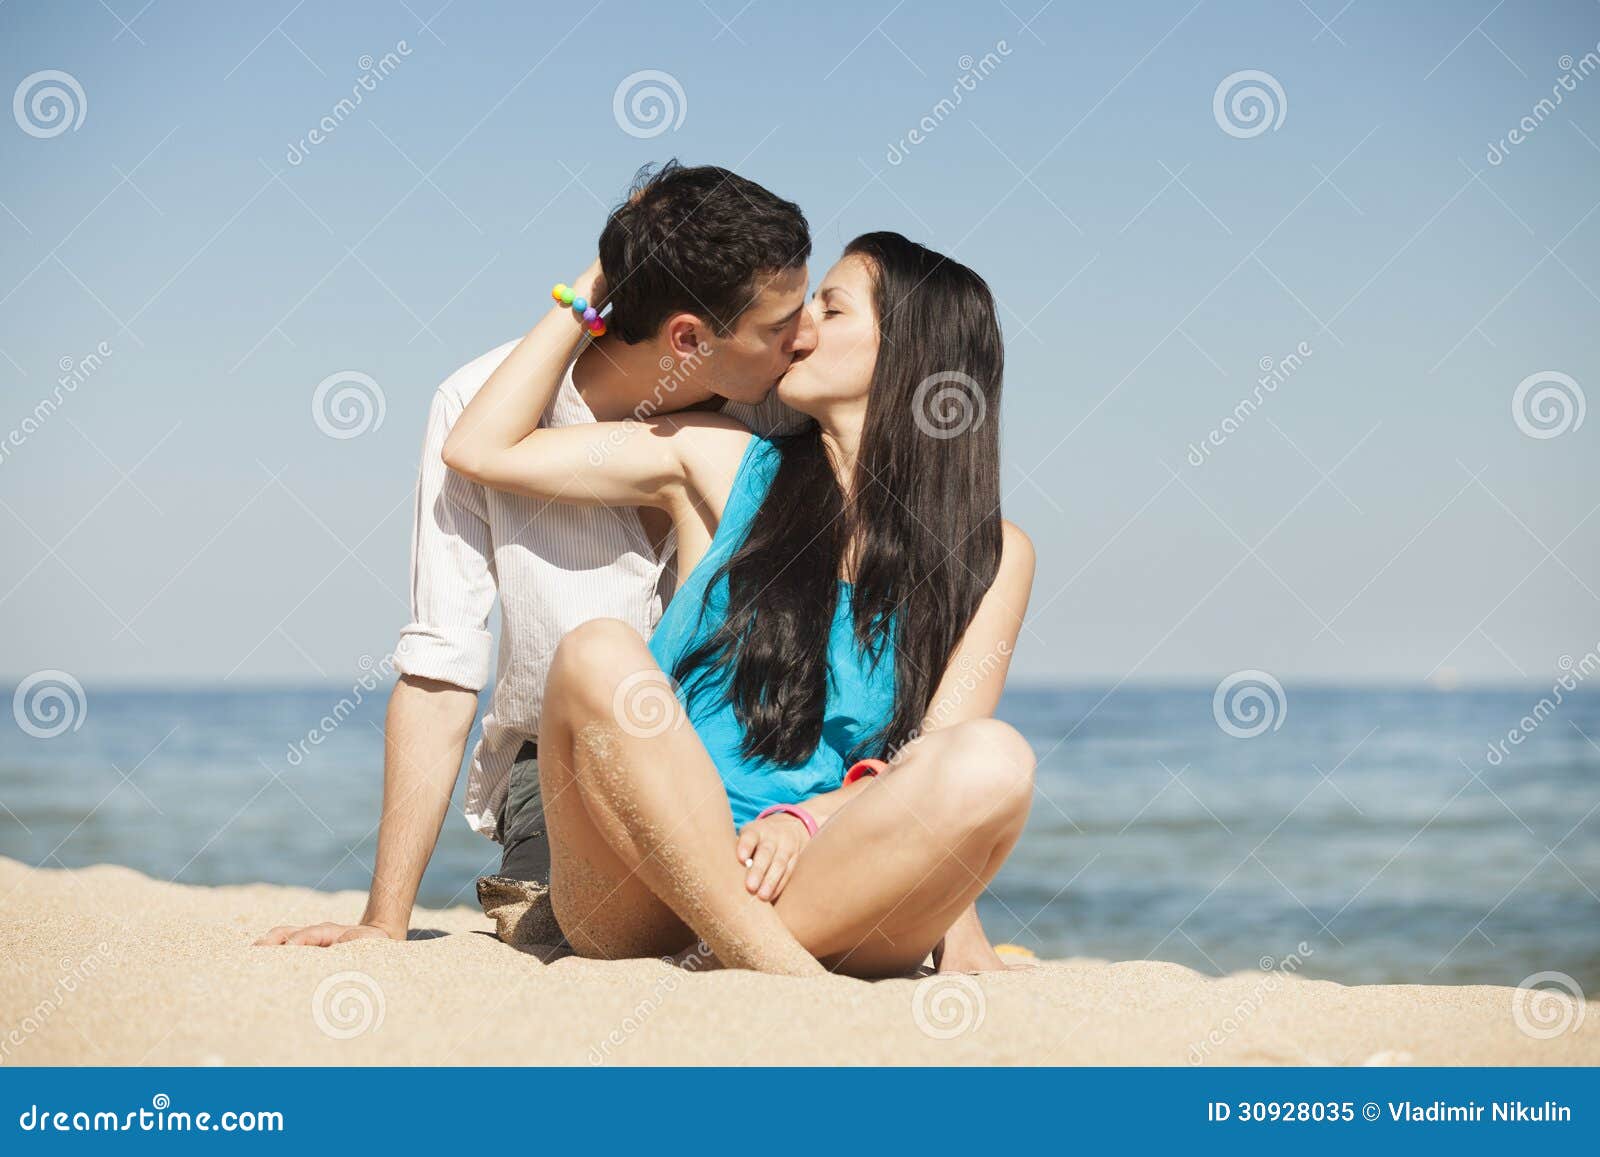 Couple Kissing On The Beach Stock Image Image 30928035